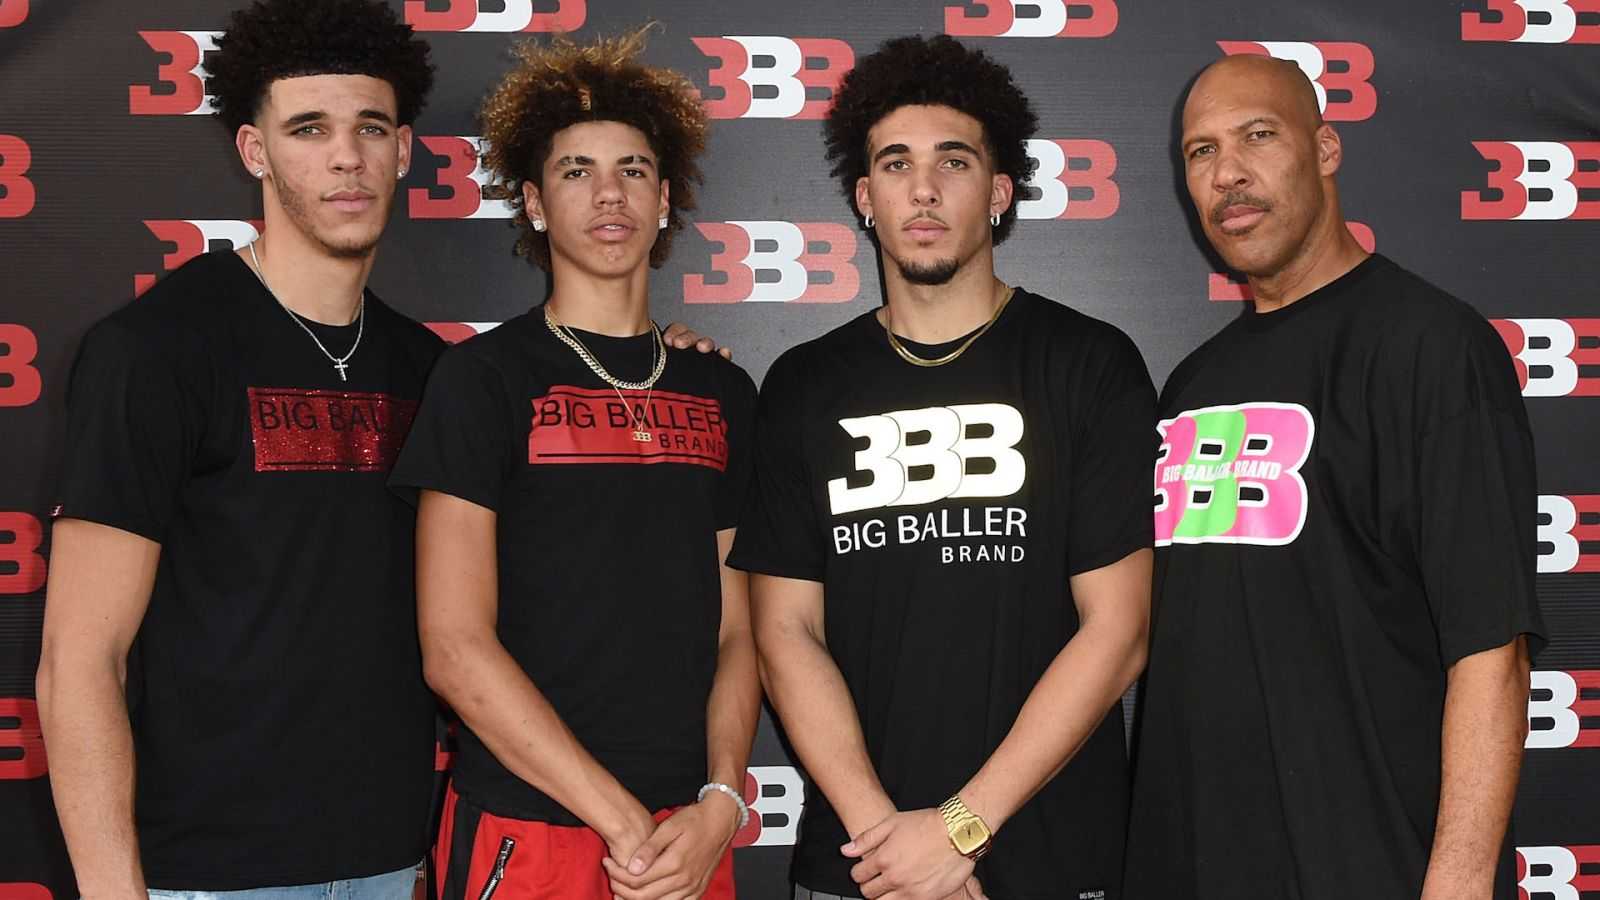  Revenge Of the Ball: Why the 2019-2020 Season Is The Biggest For The Brothers